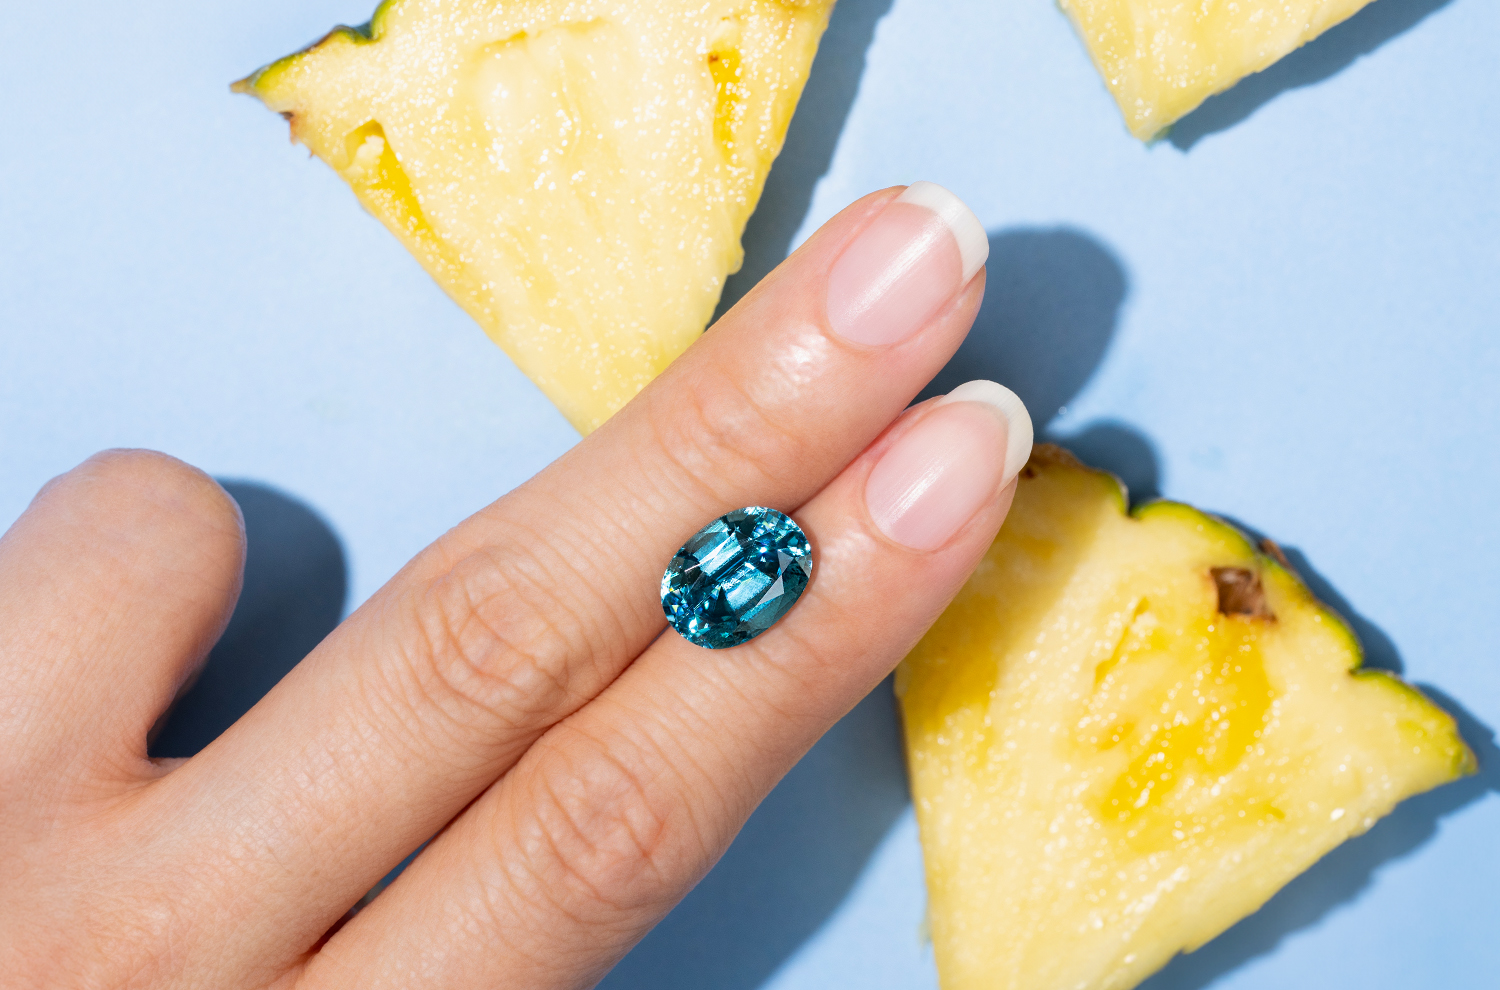 A fun, summer themed photo of an oval-shaped blue Zircon with a vibrant background of blue hues and bright yellow pineapple slices.